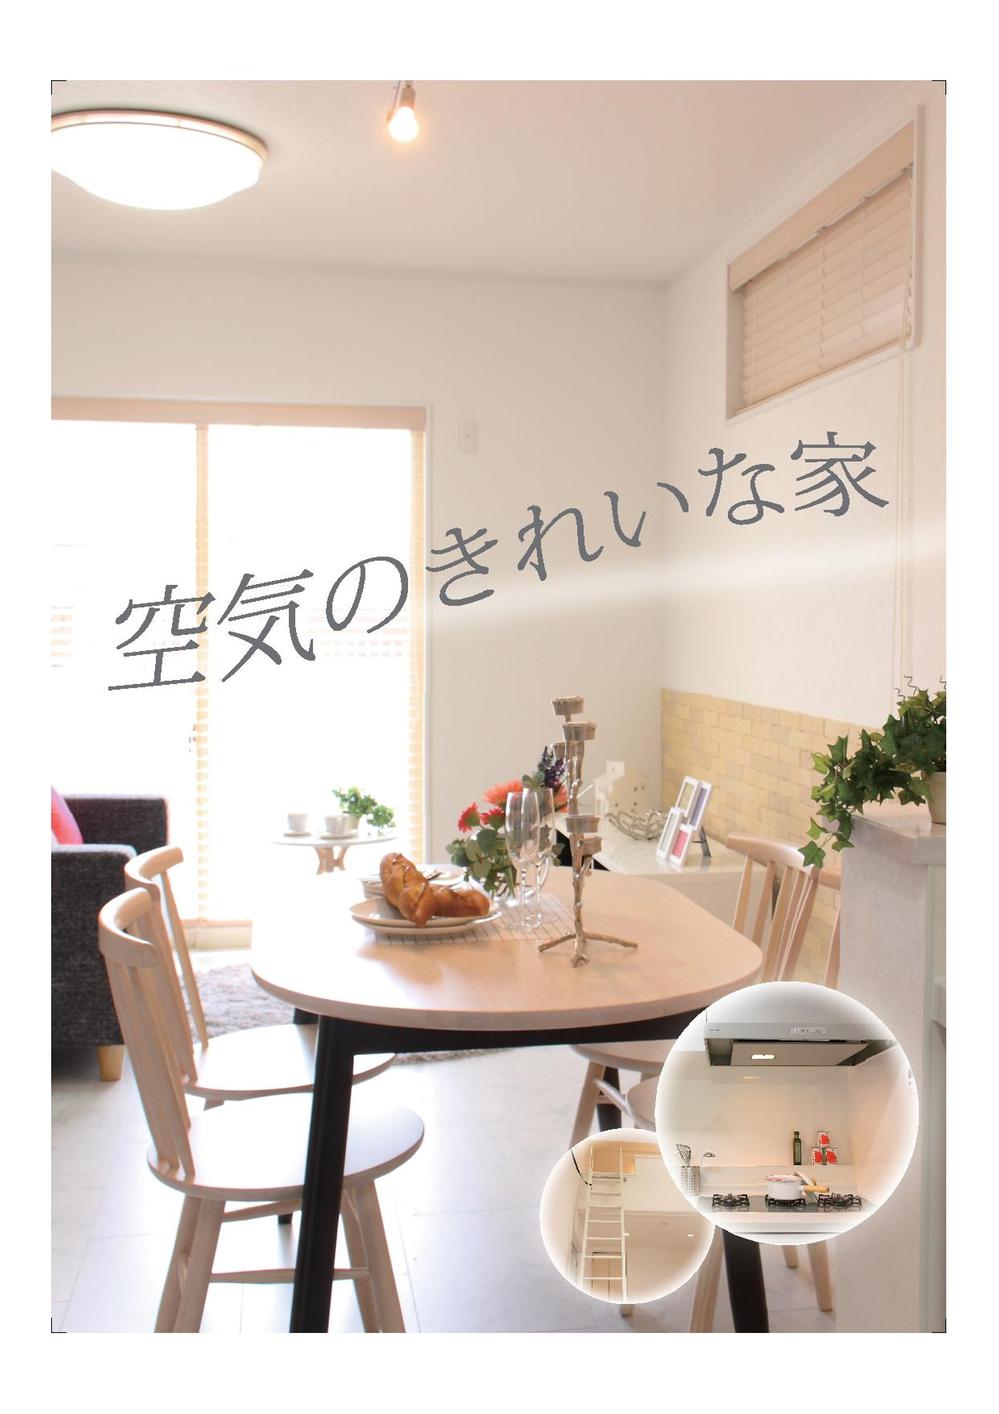 Construction ・ Construction method ・ specification. Model house concept ・  ・  ・ is. 